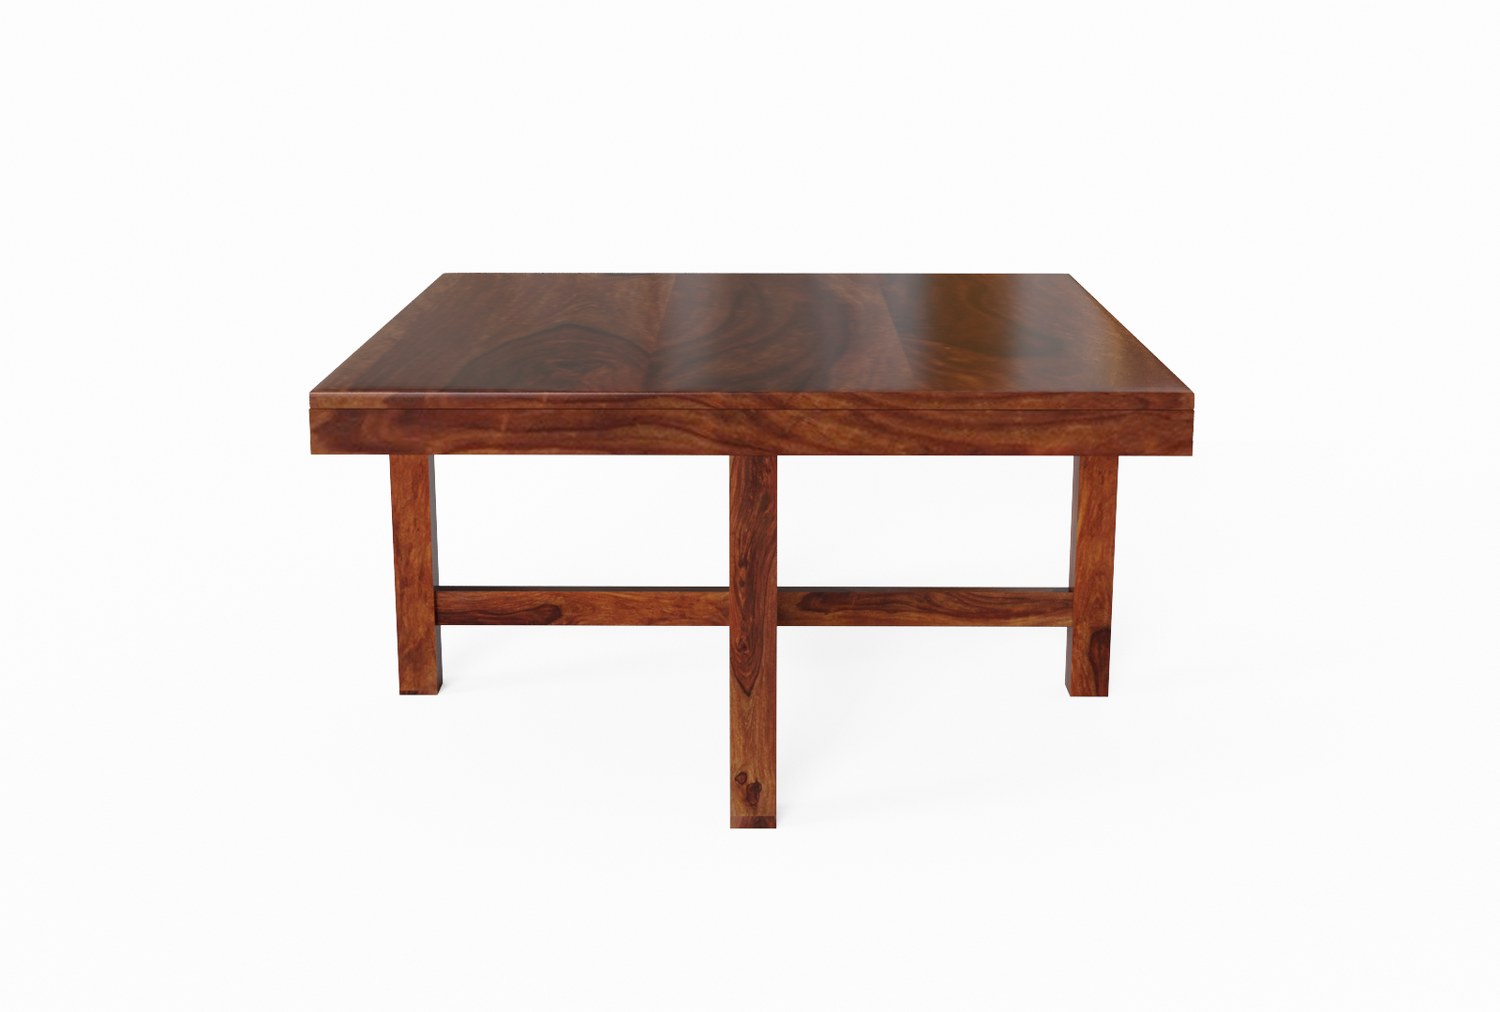 Mobell Solid Sheesham Wood Coffee Table Set With Four Stools (Capsule, Natural Finish)